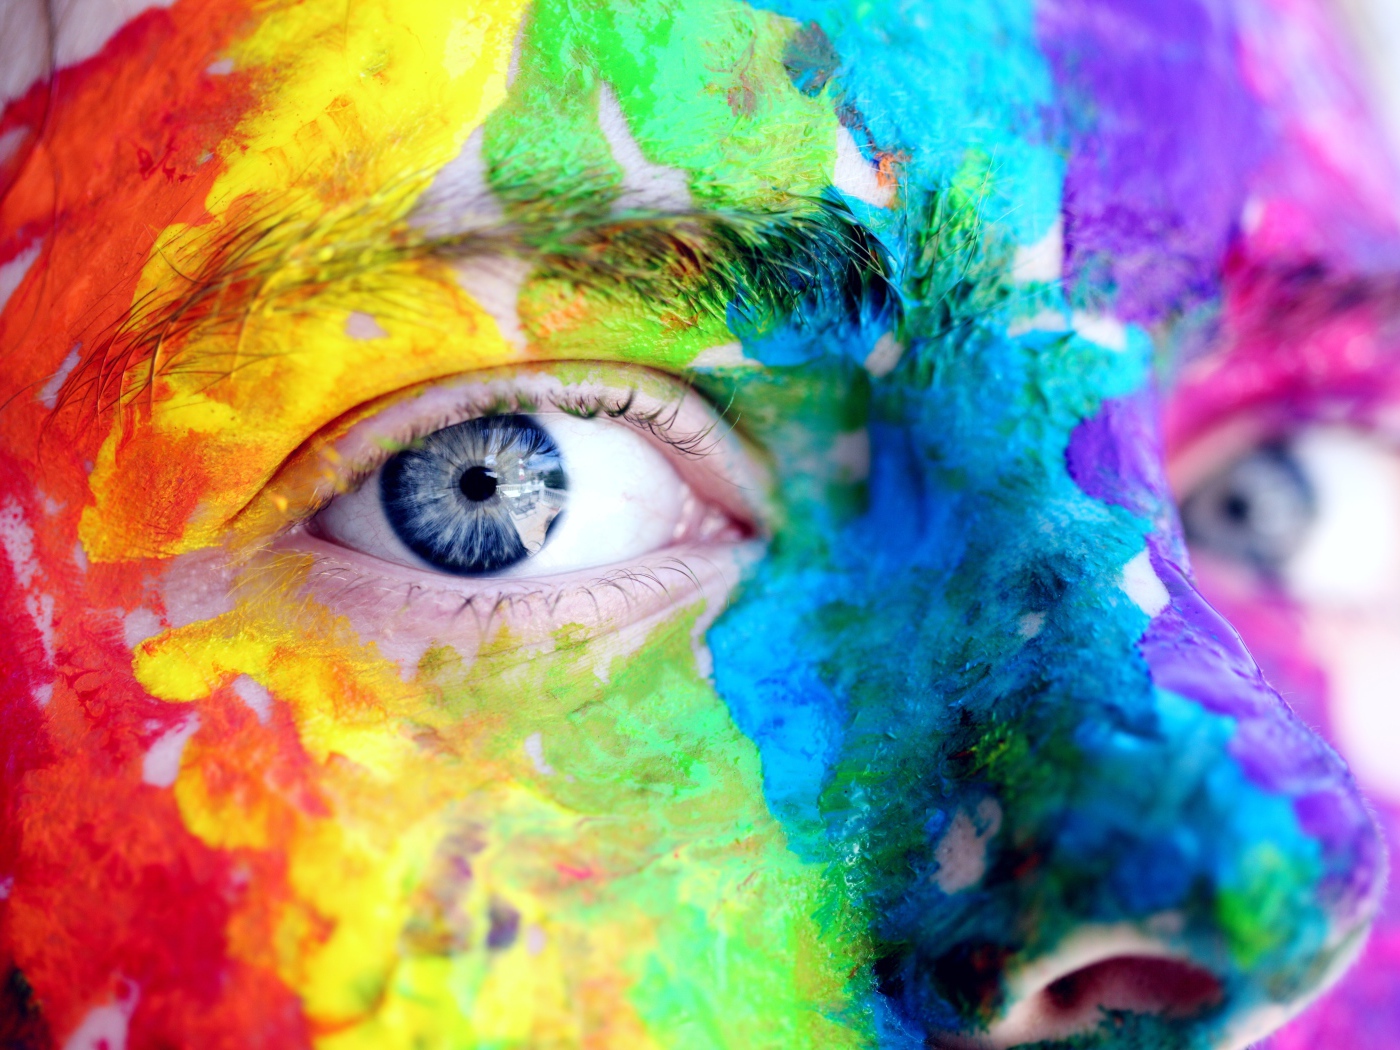 The face of a blue-eyed man in multi-colored paints close-up